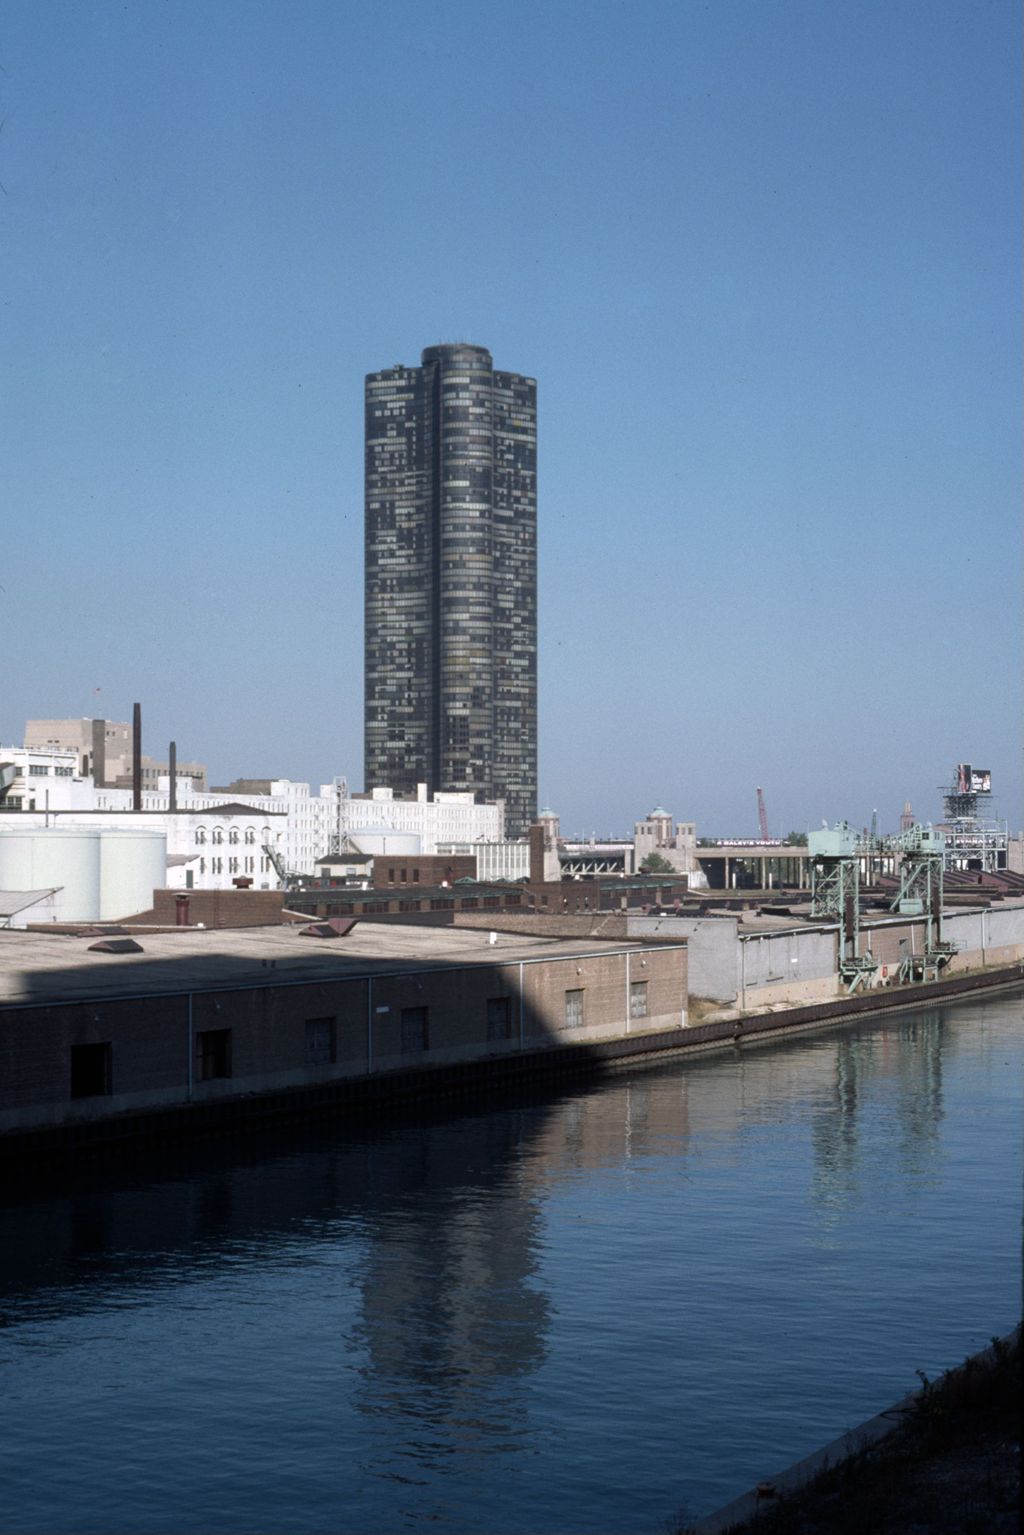 Miniature of Lake Point Tower and industrial buildings along the Chicago River